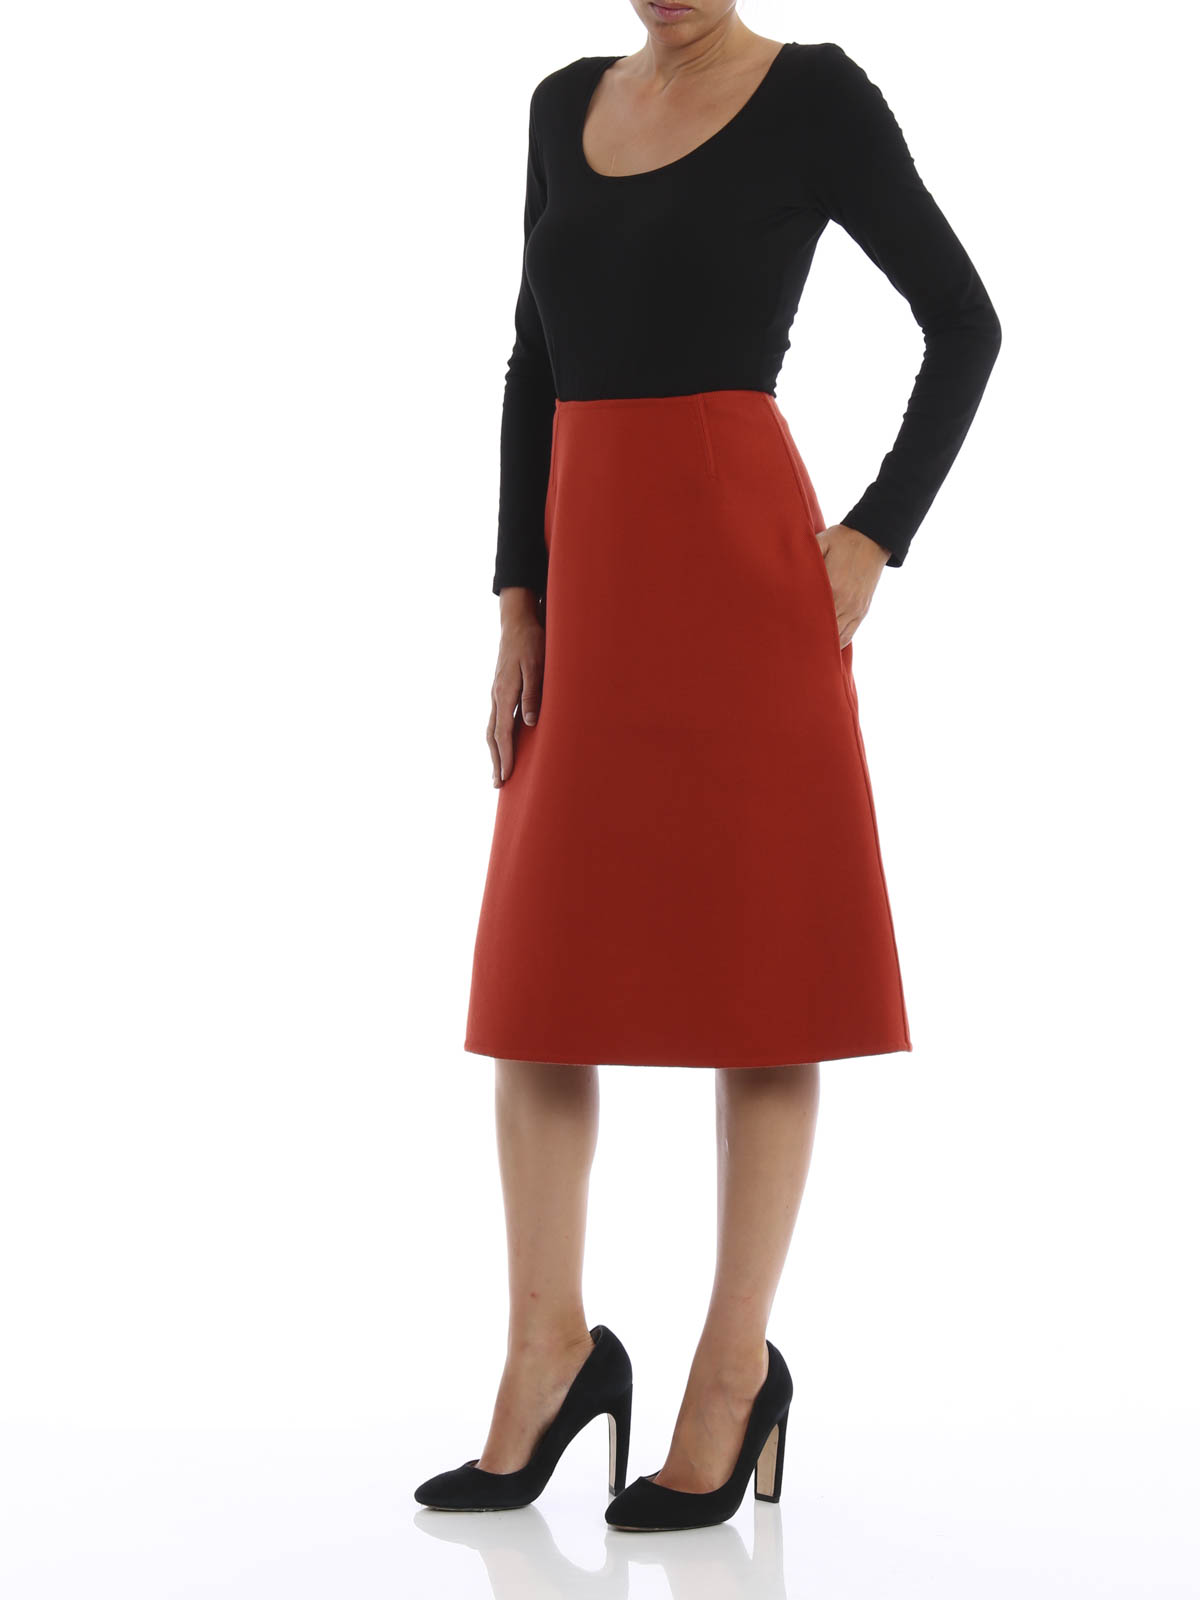 O'Connell's Boiled Wool A-Line Skirt - Charcoal - Men's Clothing,  Traditional Natural shouldered clothing, preppy apparel